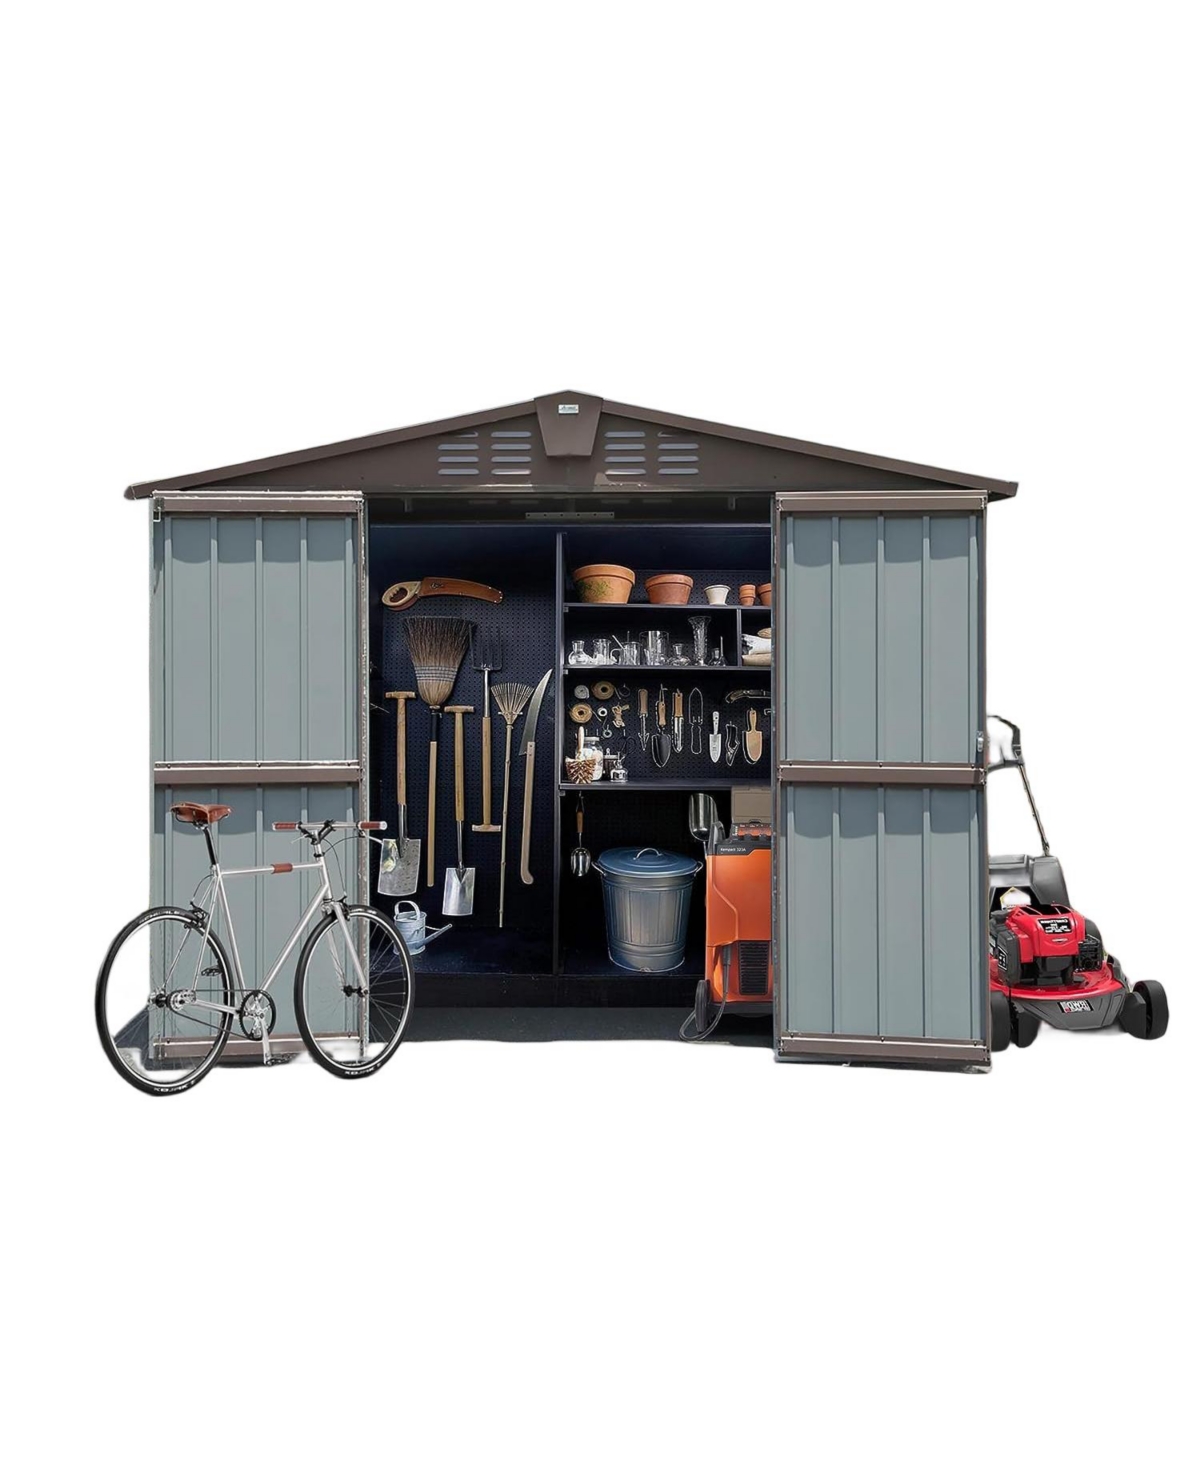 Metal Outdoor Storage Shed 8.2' x 6.2' with Double Doors - Brown